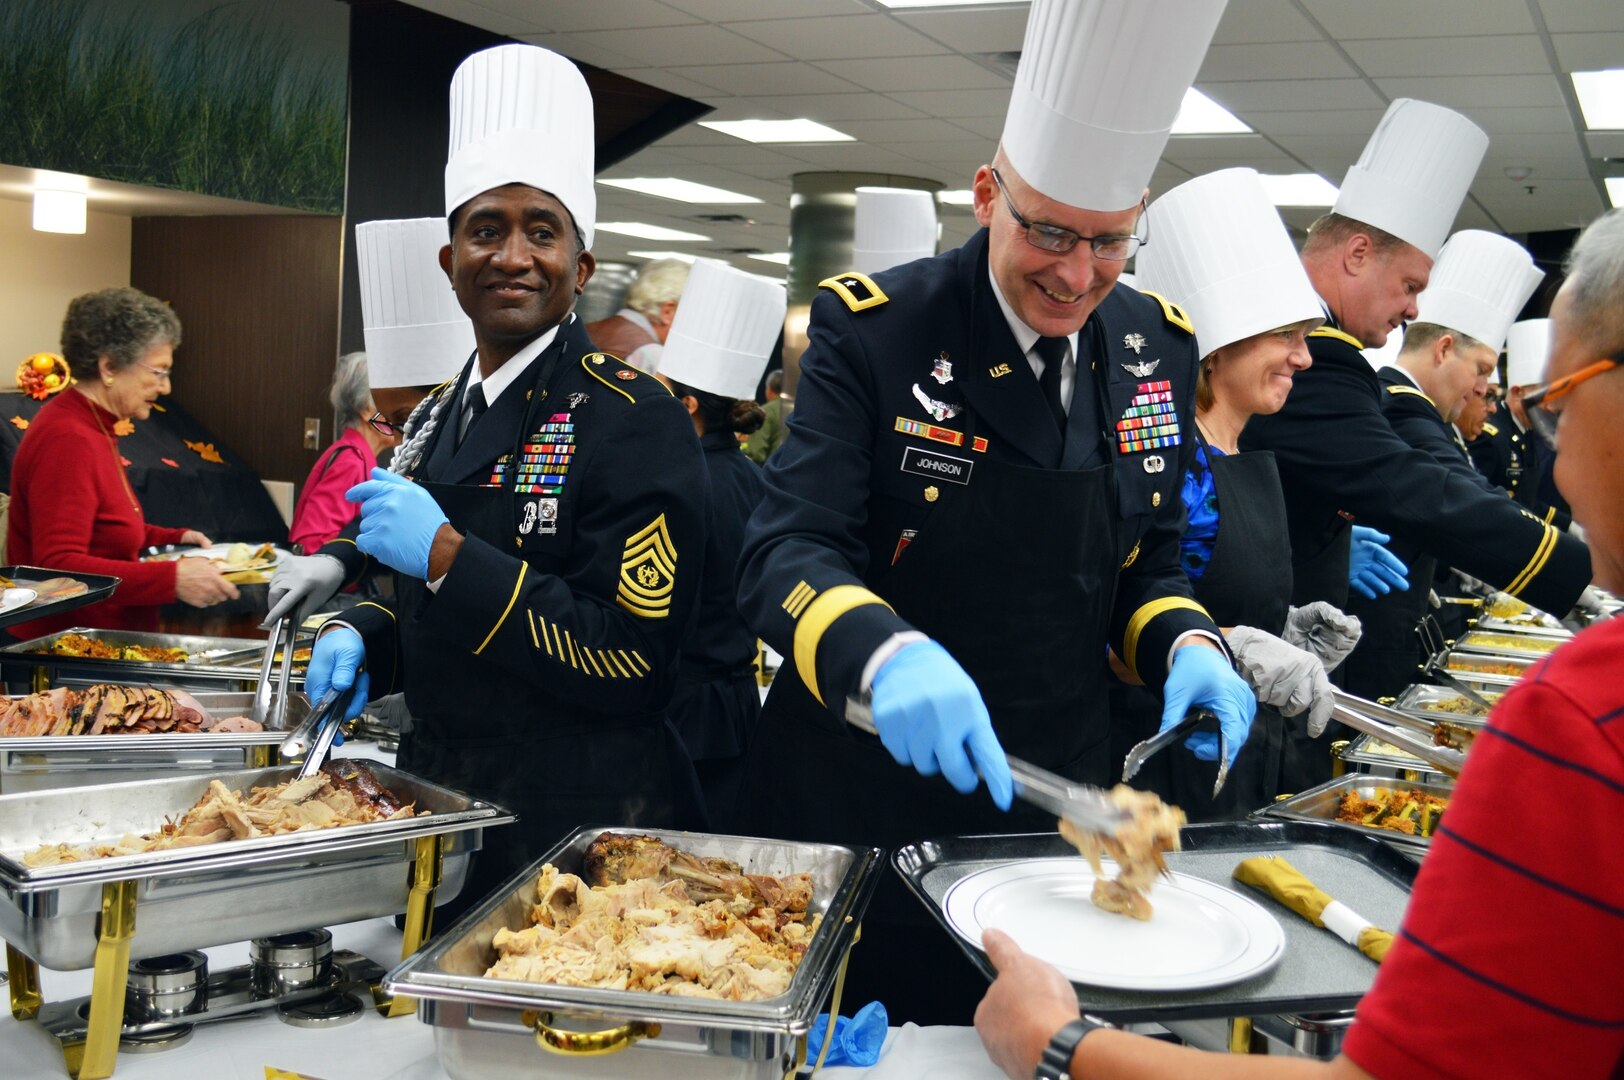 Brooke Army Medical Center commanding general Brig. Gen. Jeffrey Johnson and Command Sgt. Maj. Diamond Hough help serve Thanksgiving dinner to more than 1,000 guests Nov. 23 in the BAMC Dining Room at Joint Base San Antonio-Fort Sam Houston.